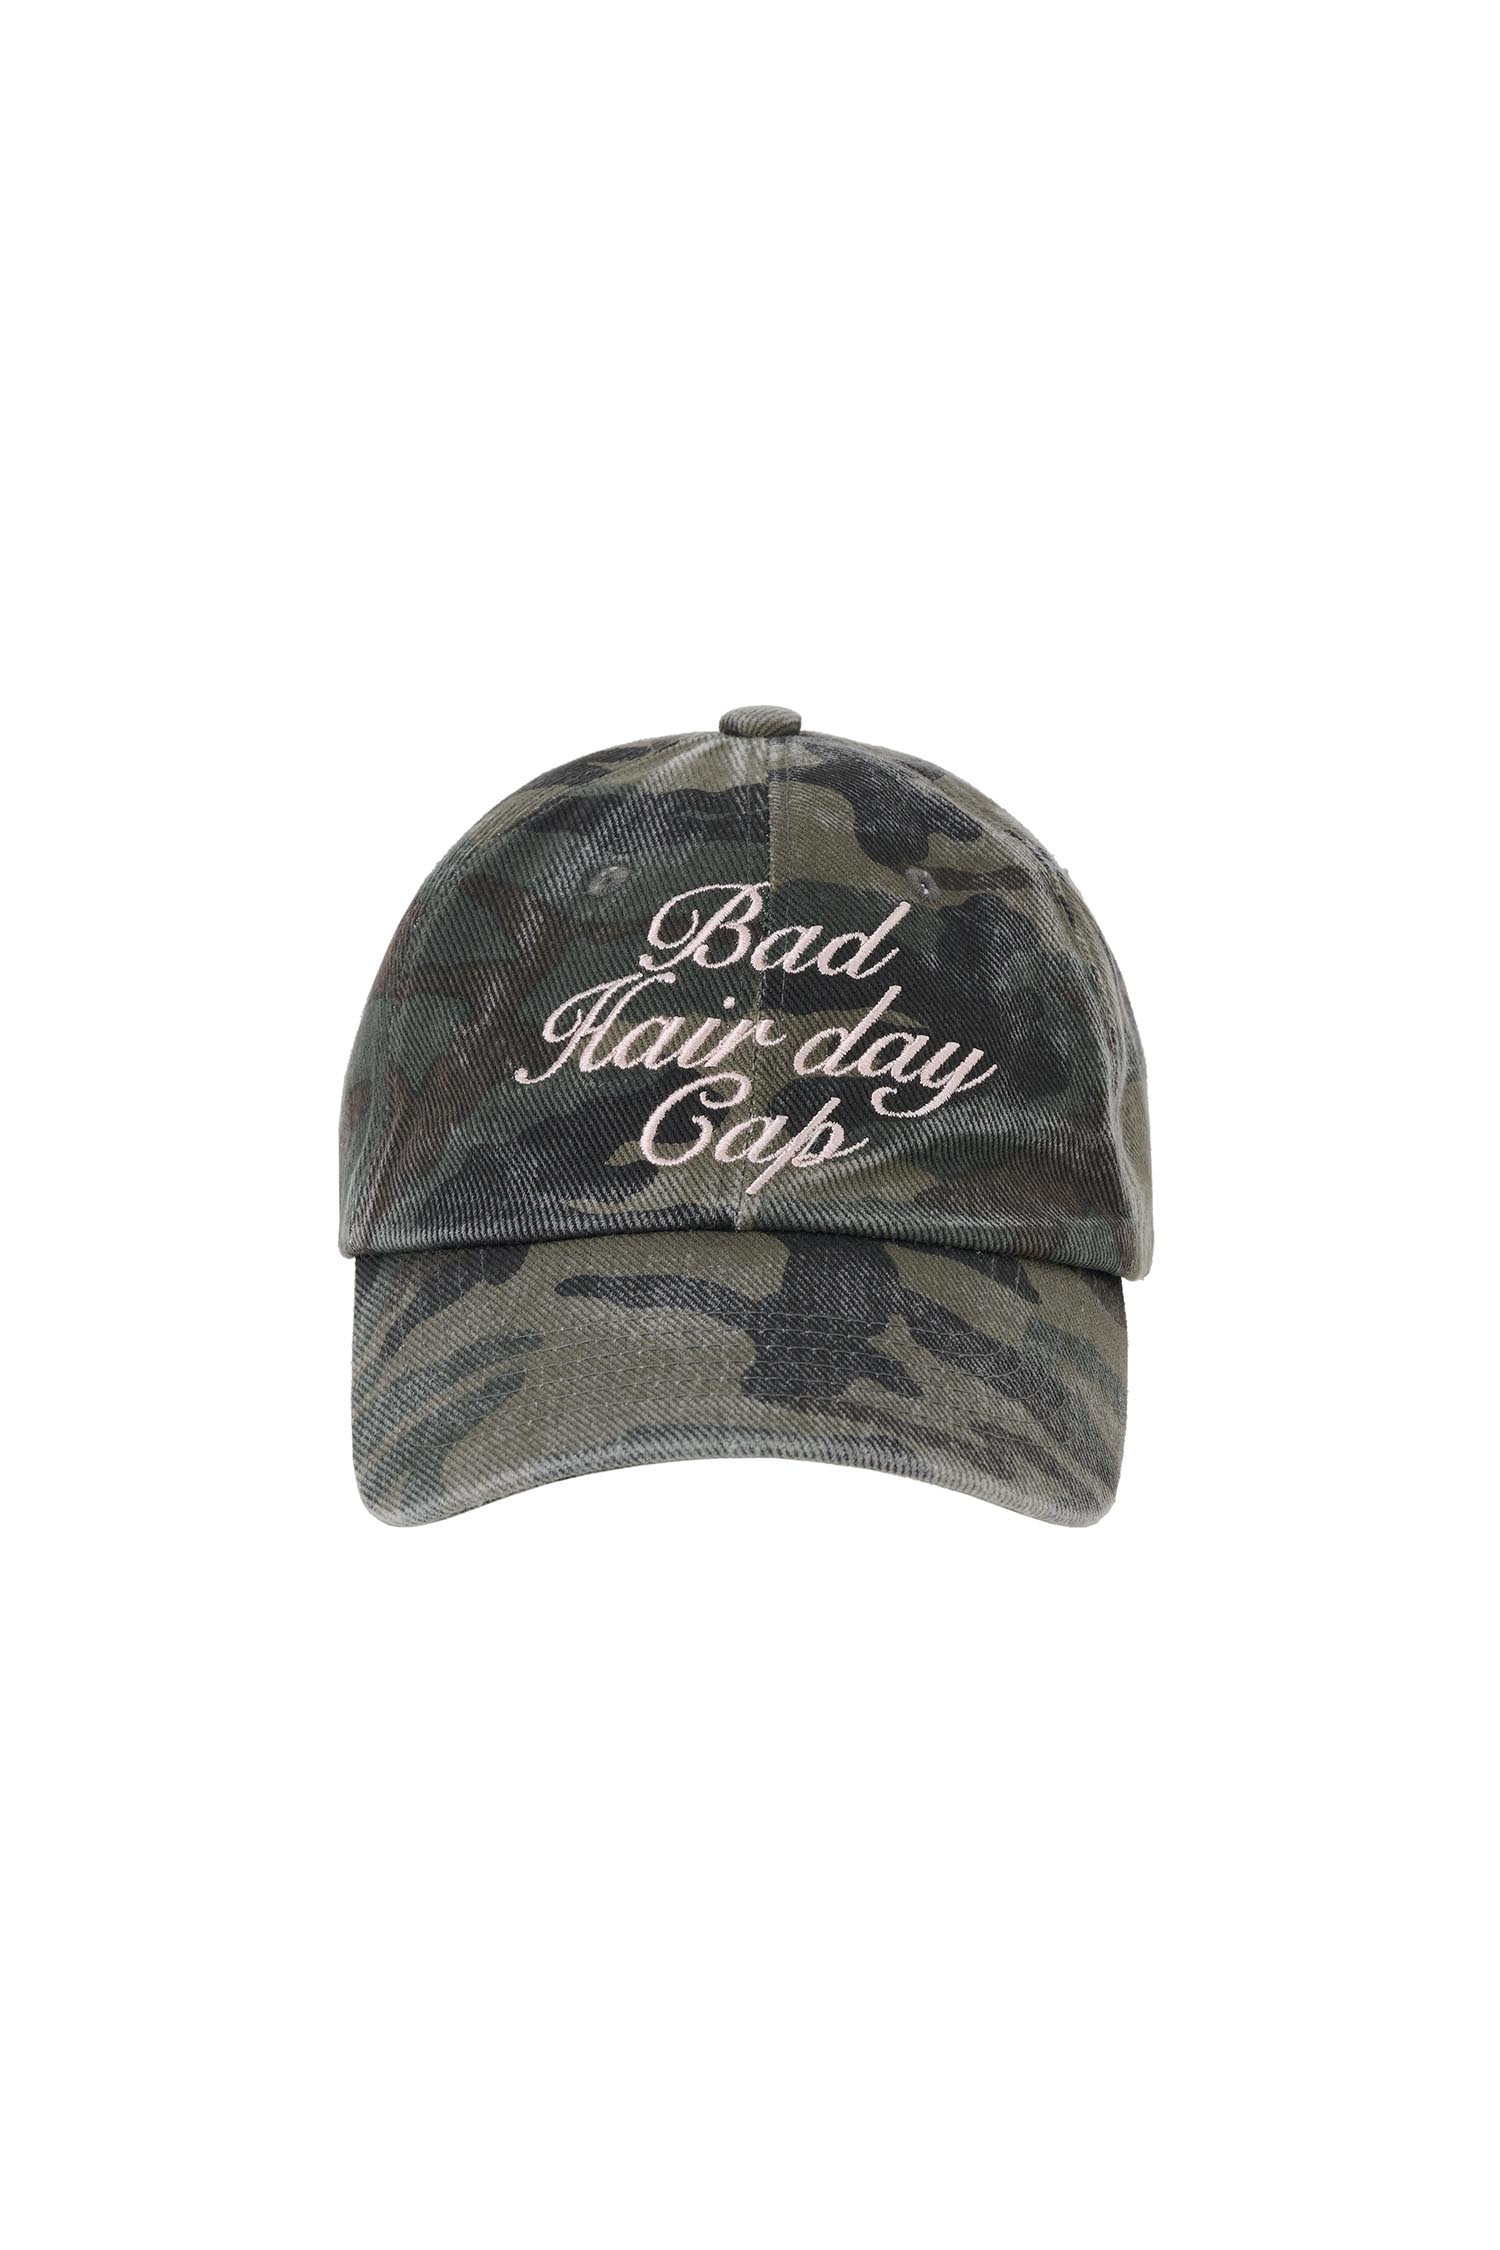 Bad Hair Day Cap Camouflage